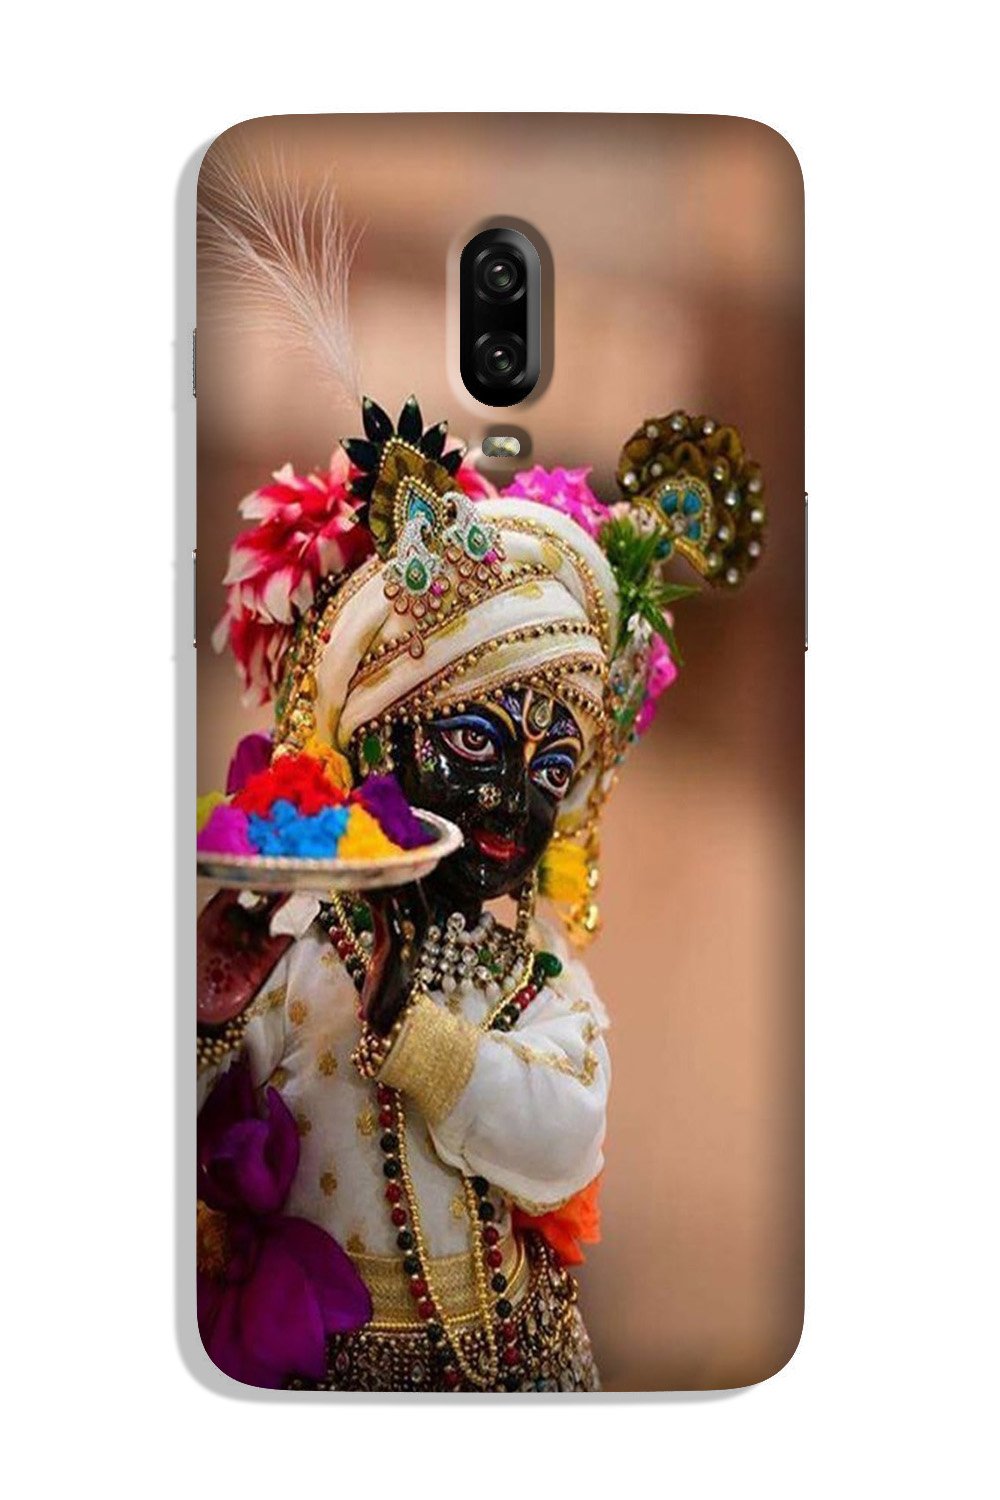 Lord Krishna2 Case for OnePlus 6T